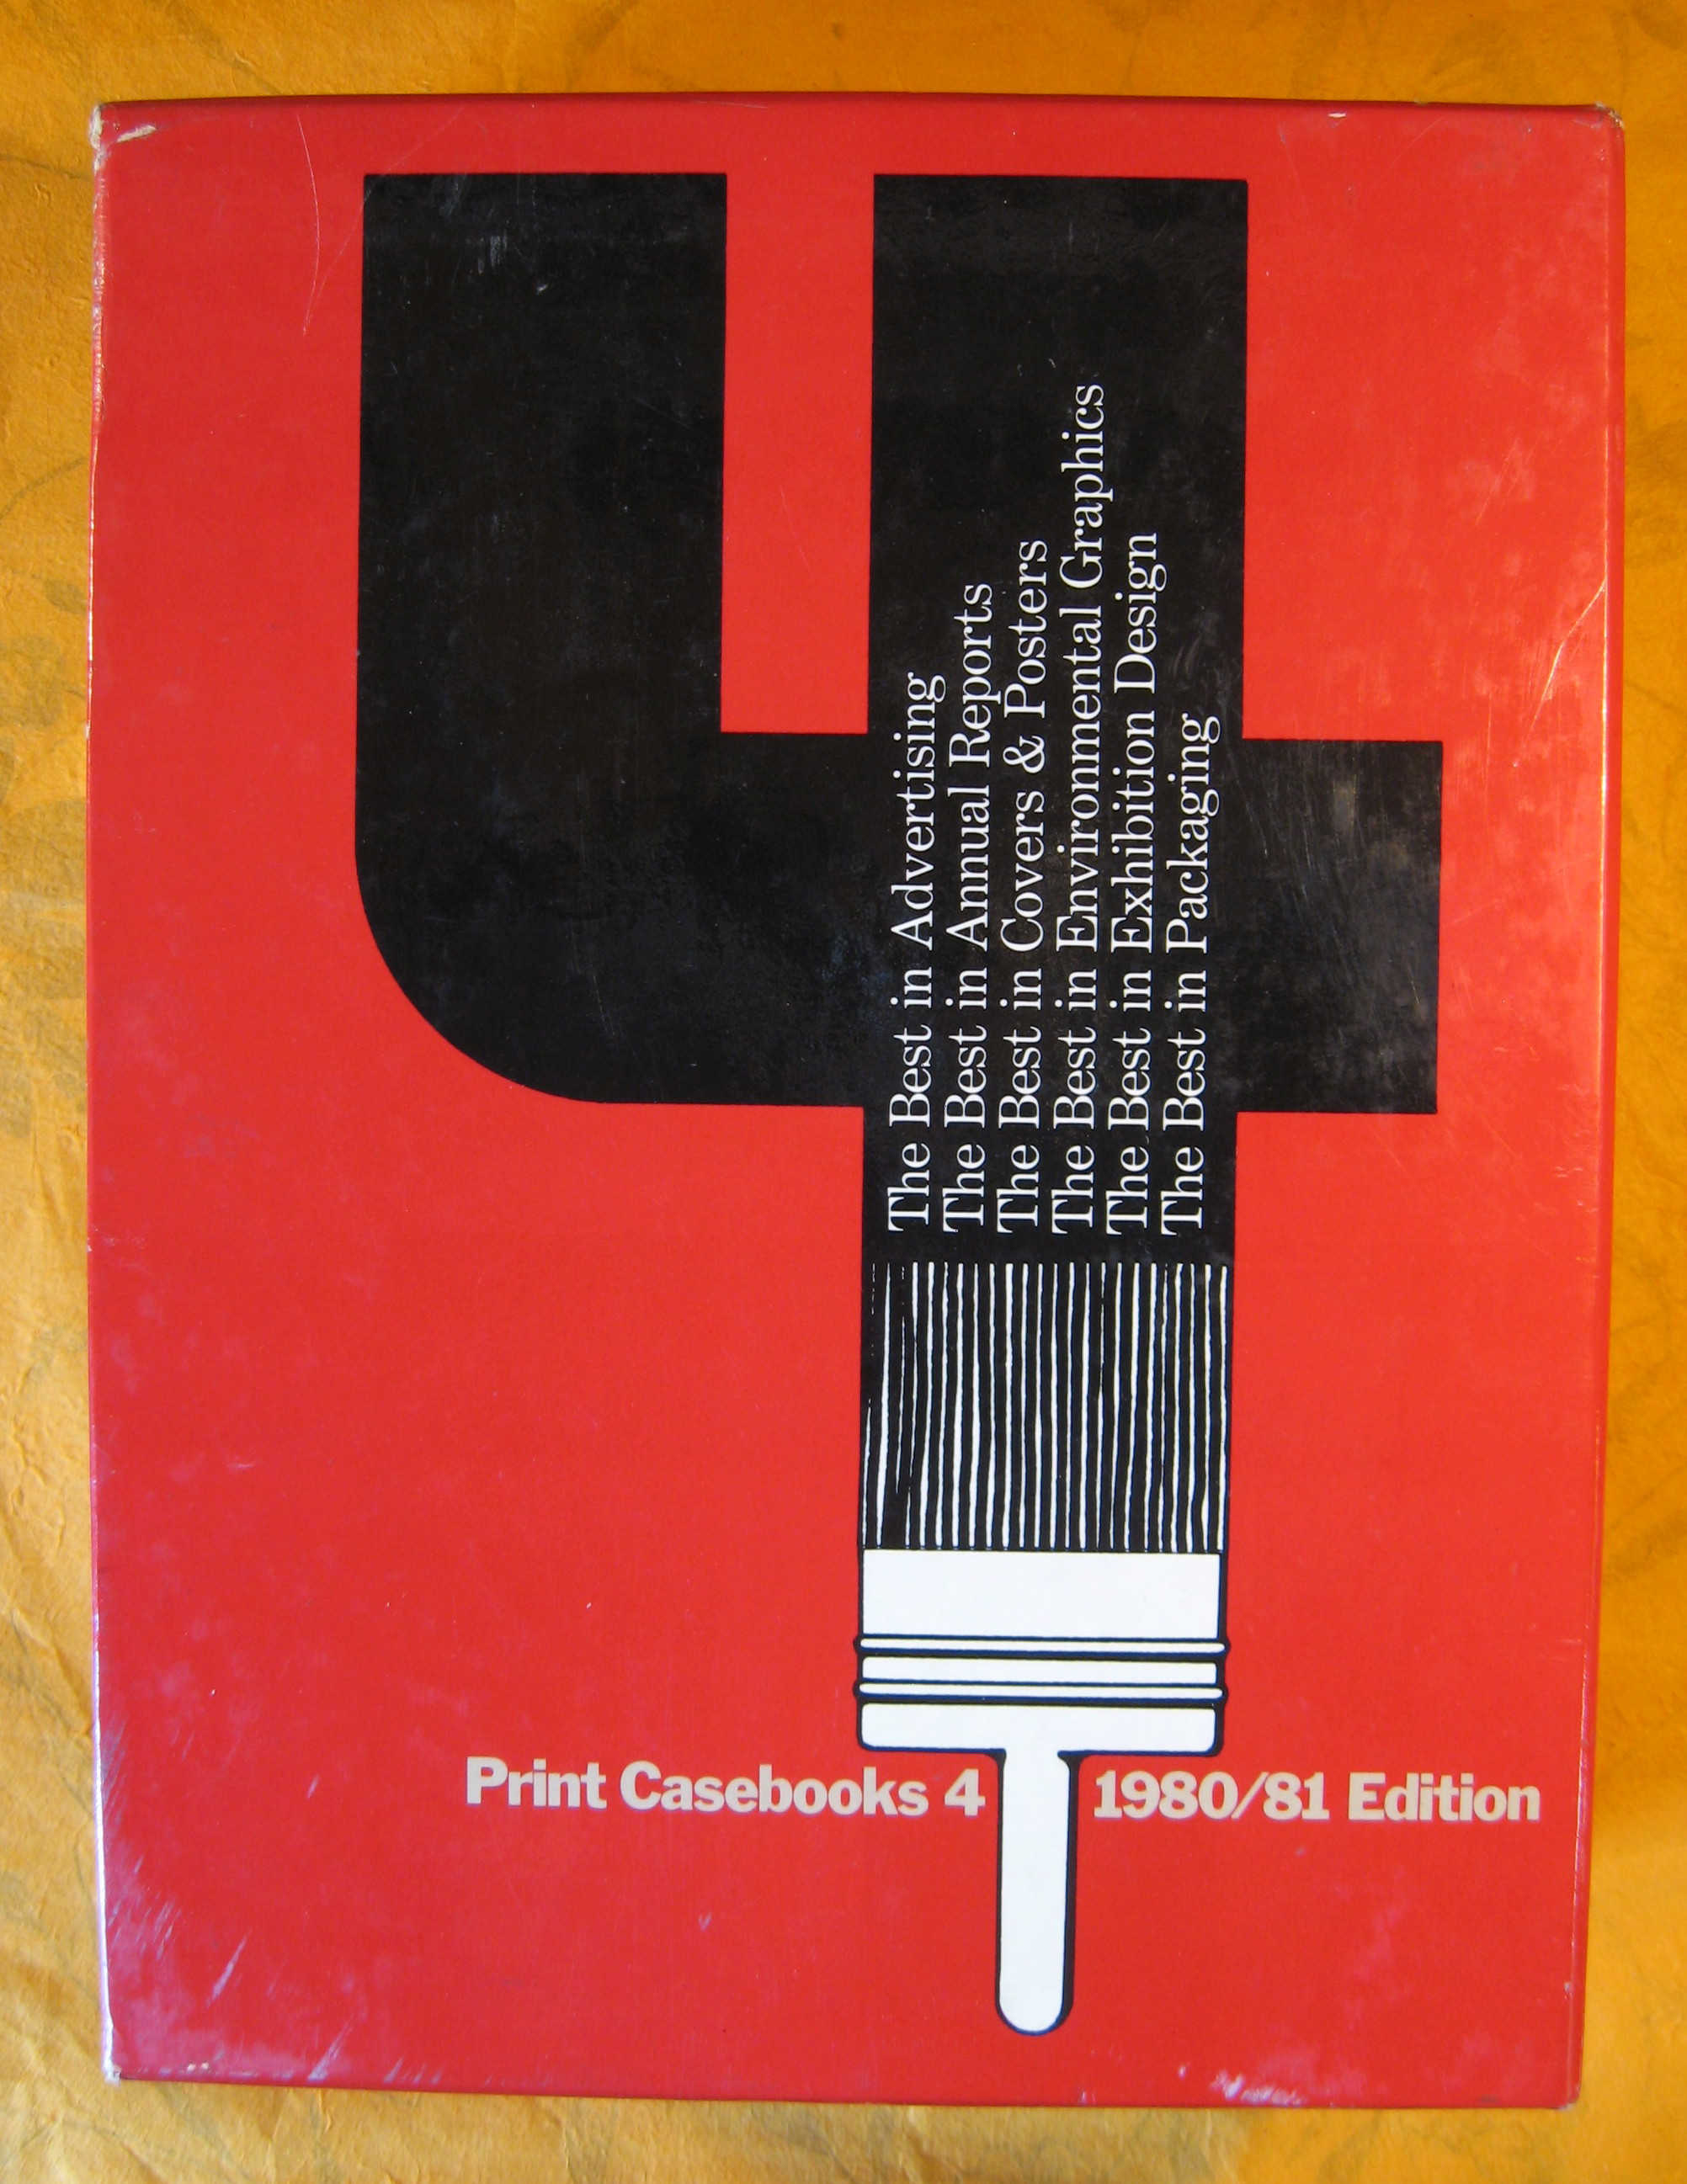 Image for Print Casebooks 4 1980/81 Edition - Six Volumes in Slipcase